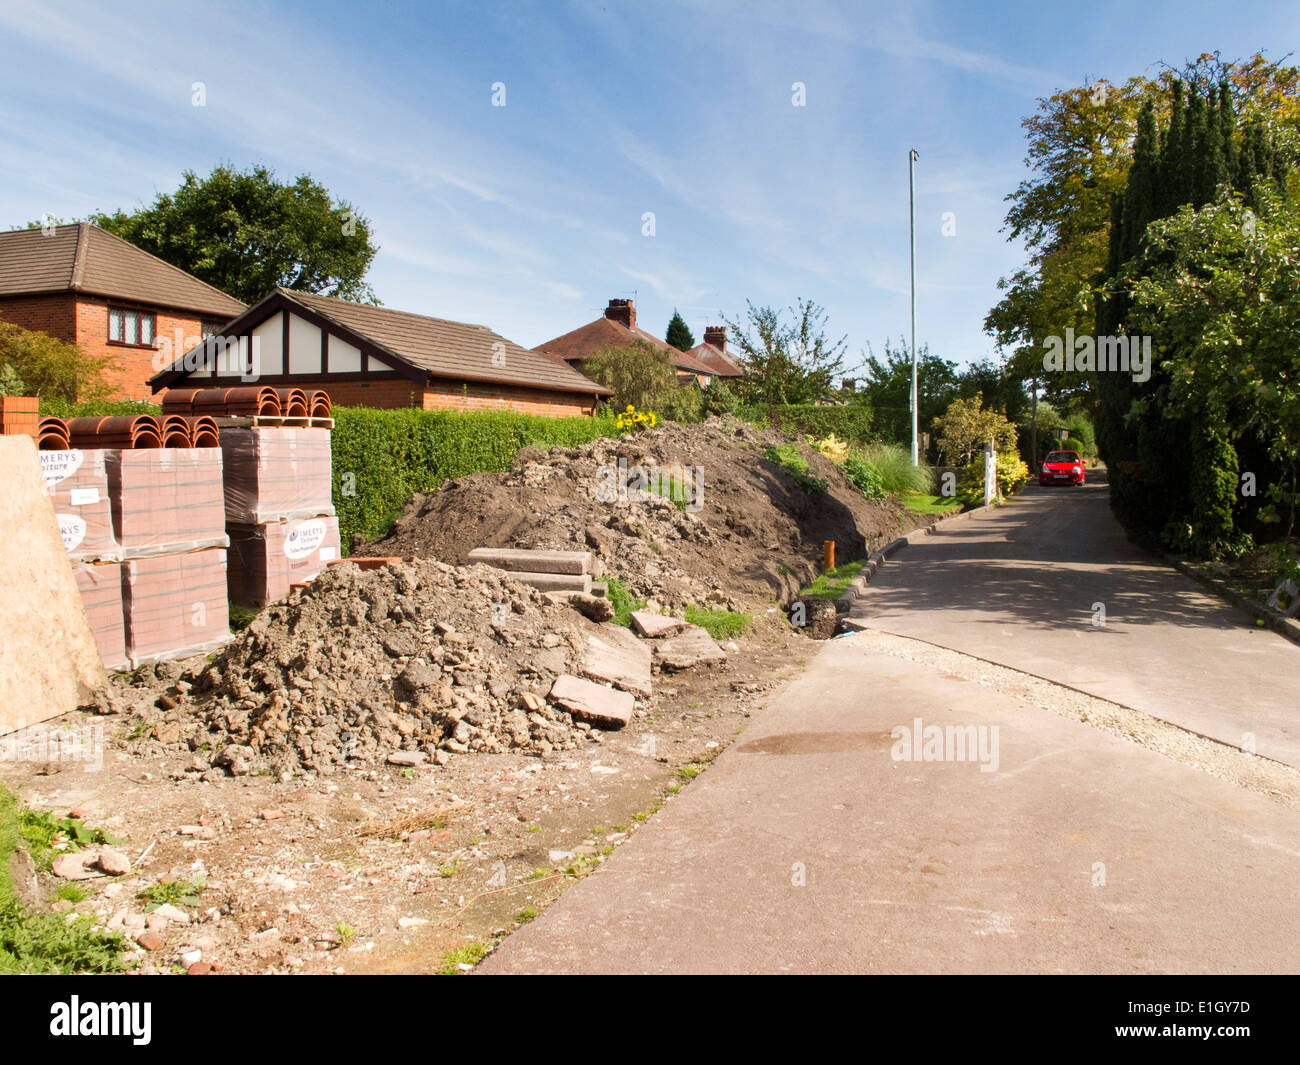 self building house, building materials and piles of spoil soil on site Stock Photo